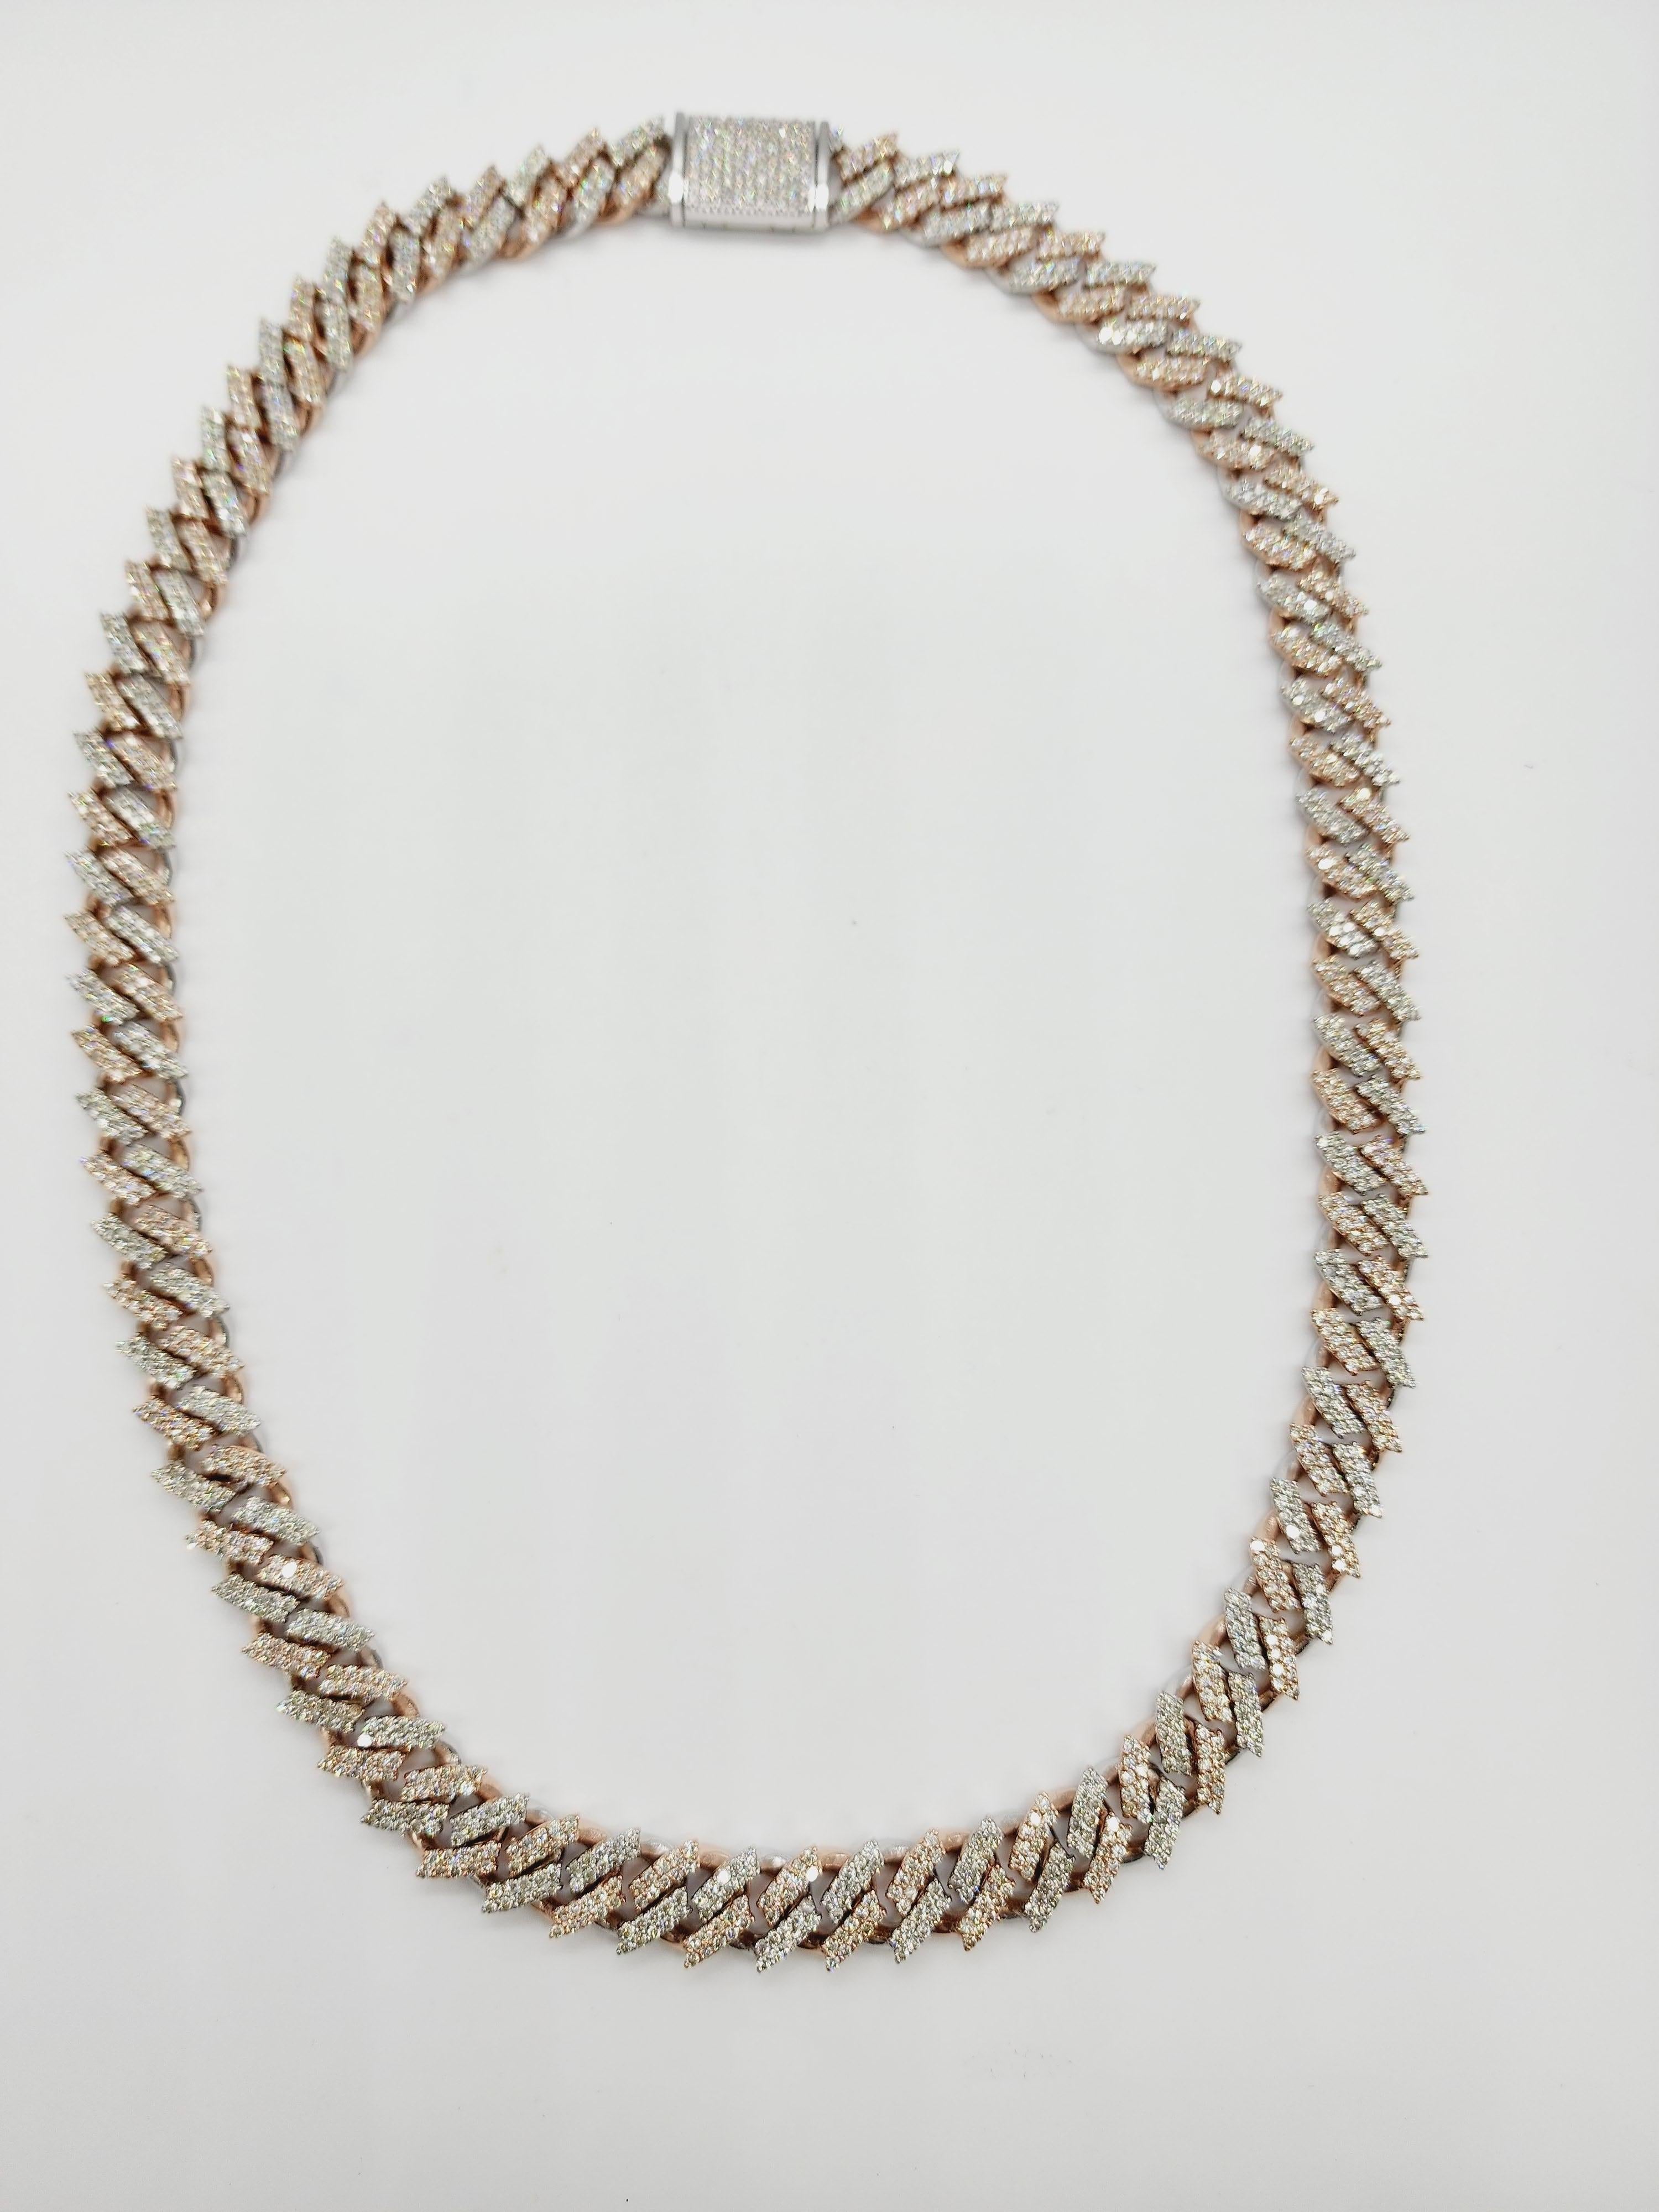 20.30 Carats Total Weight Heavy Gold Cuban Necklace Chain 14 Karats Rose Gold
Two Tone Rose and White Gold 
20 inch , 12 mm wide, Average Color I, Clarity SI, Natural Diamonds. 